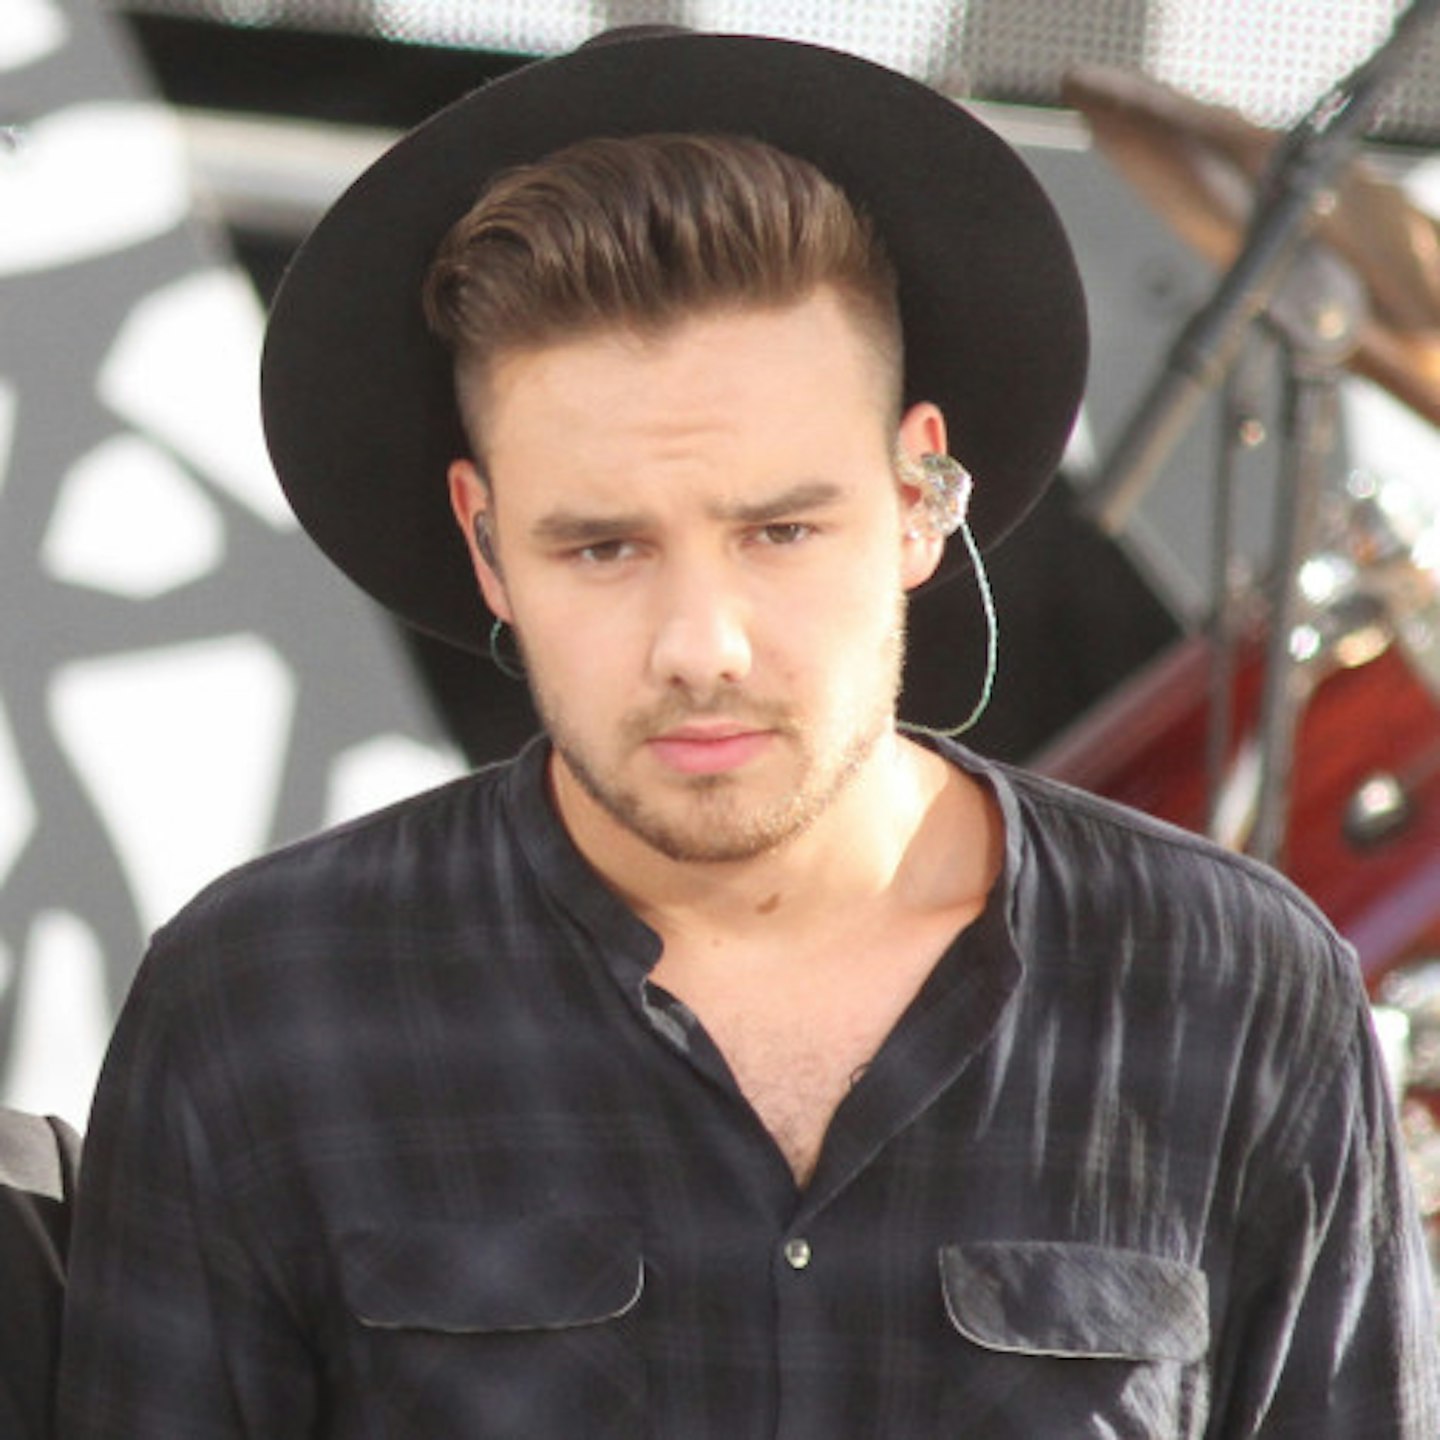 Fans were told that Liam was unwell